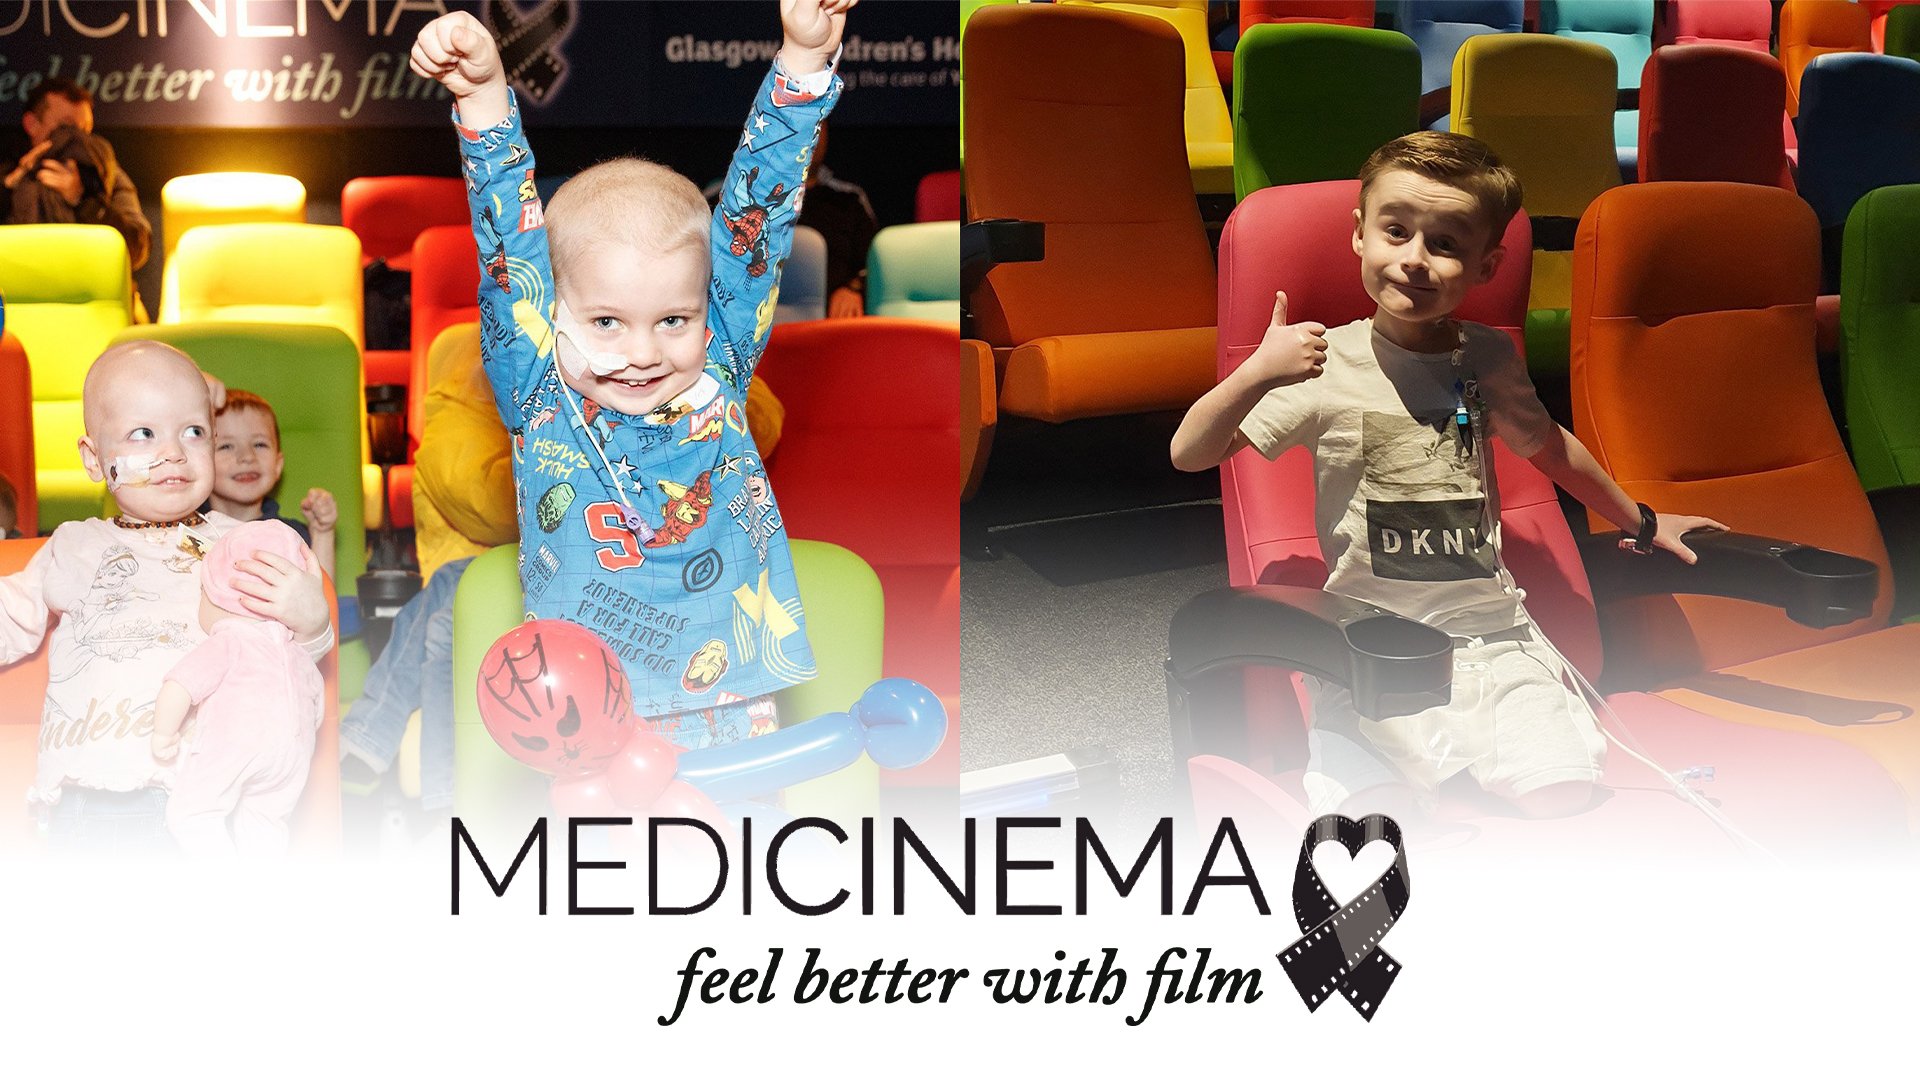 100% of the donations made at Curzon venues will go to MediCinema